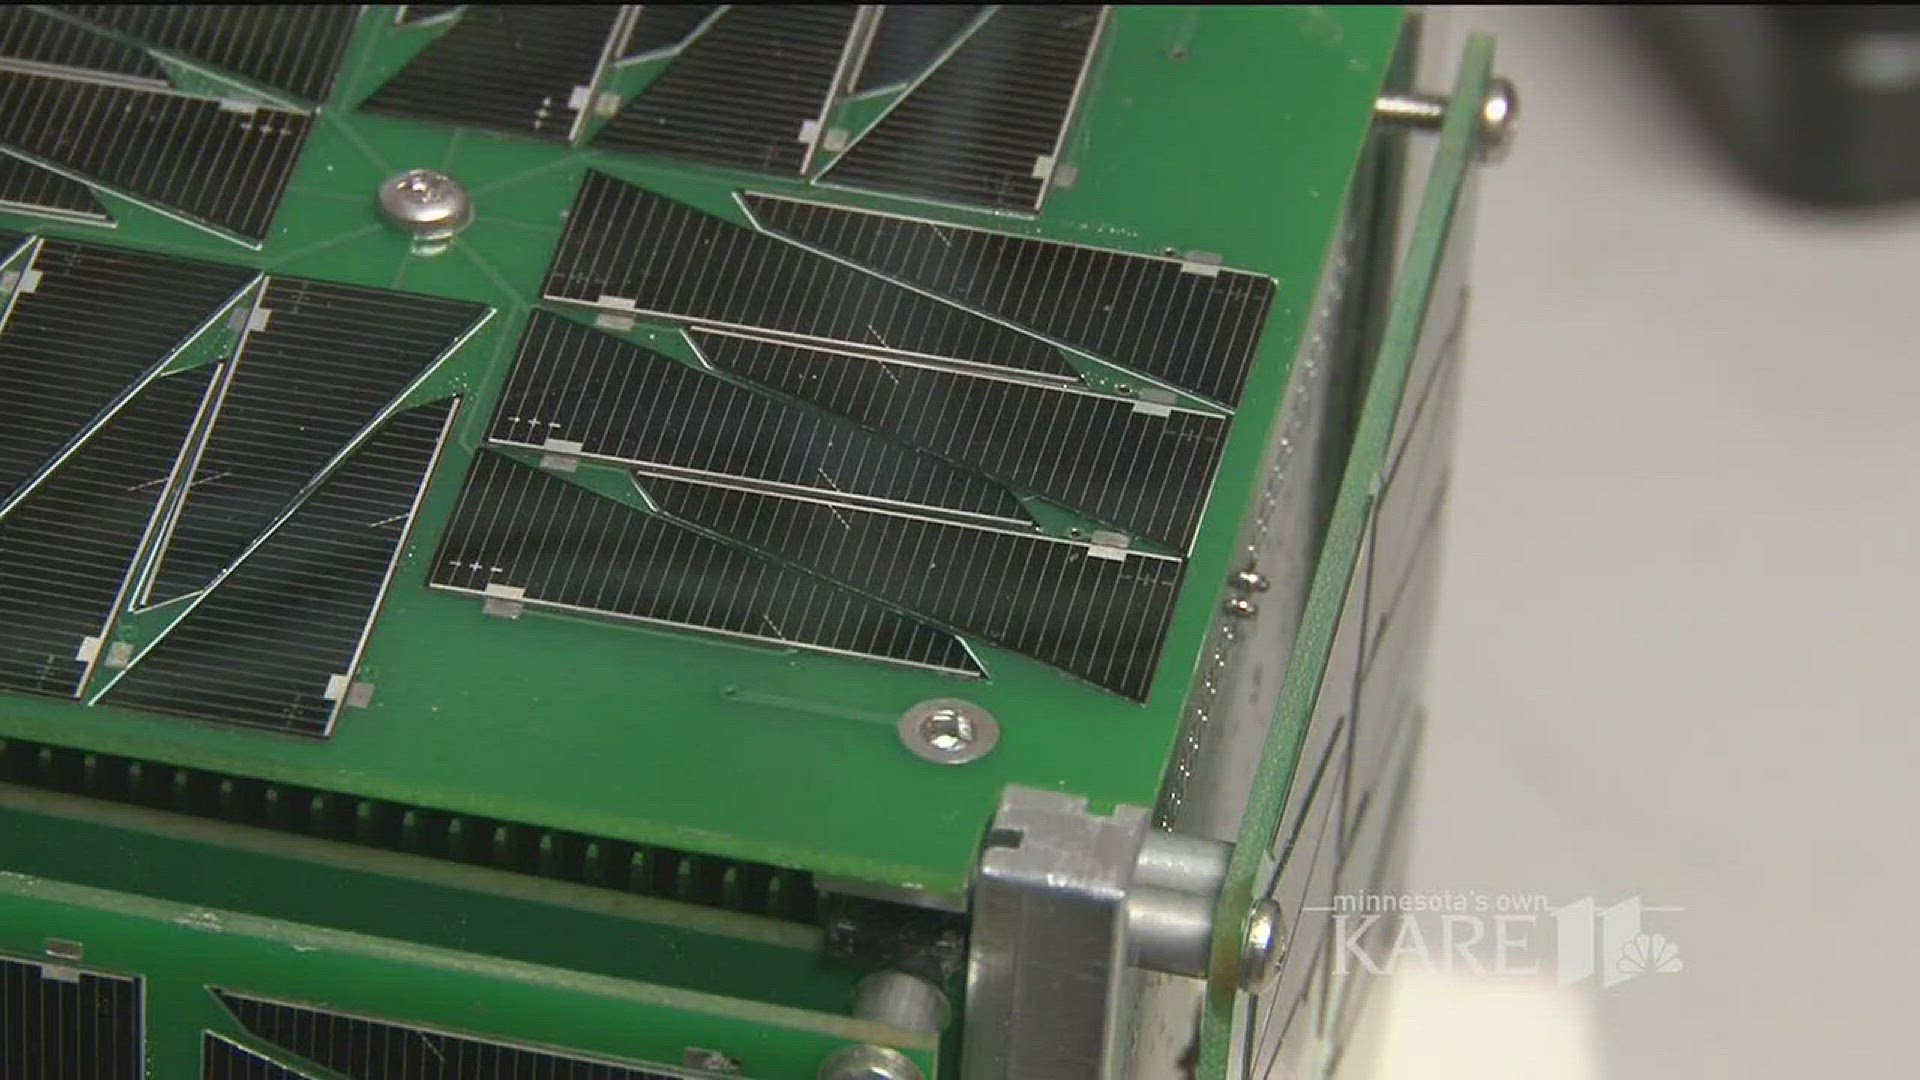 Students working to send satellite into space